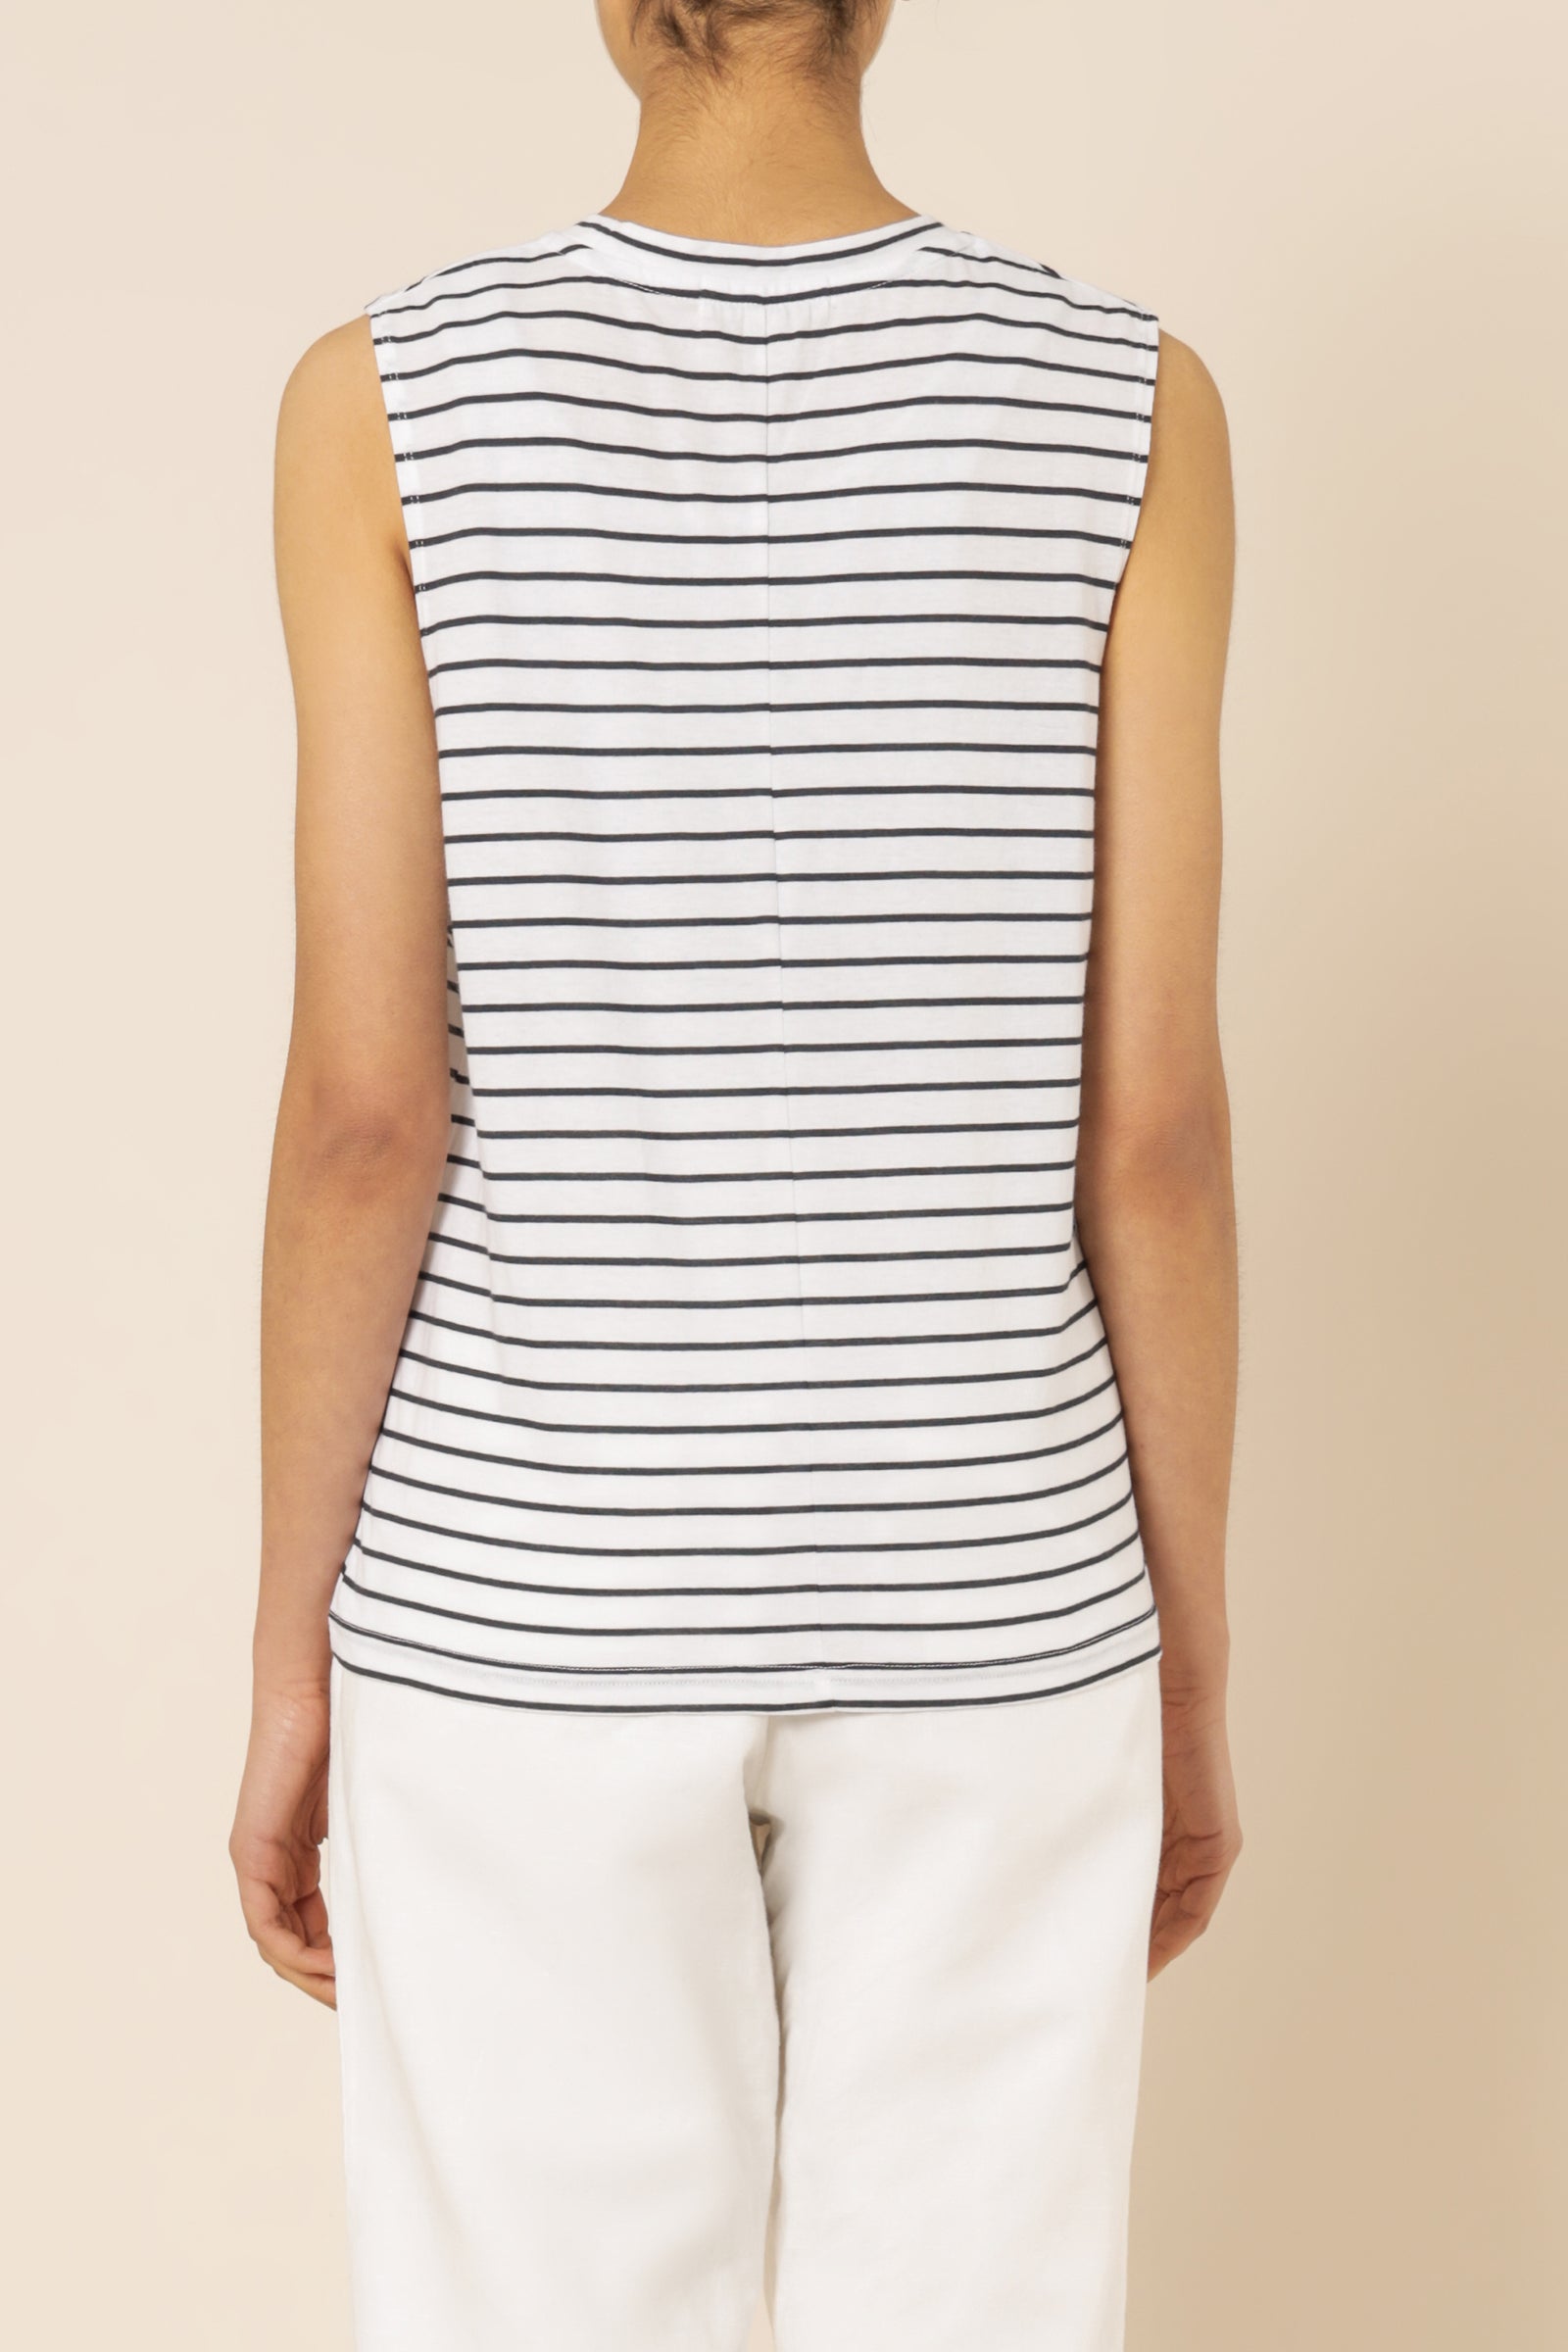 Nude Lucy Keira Organic Muscle Tank Navy Stripe Tees 